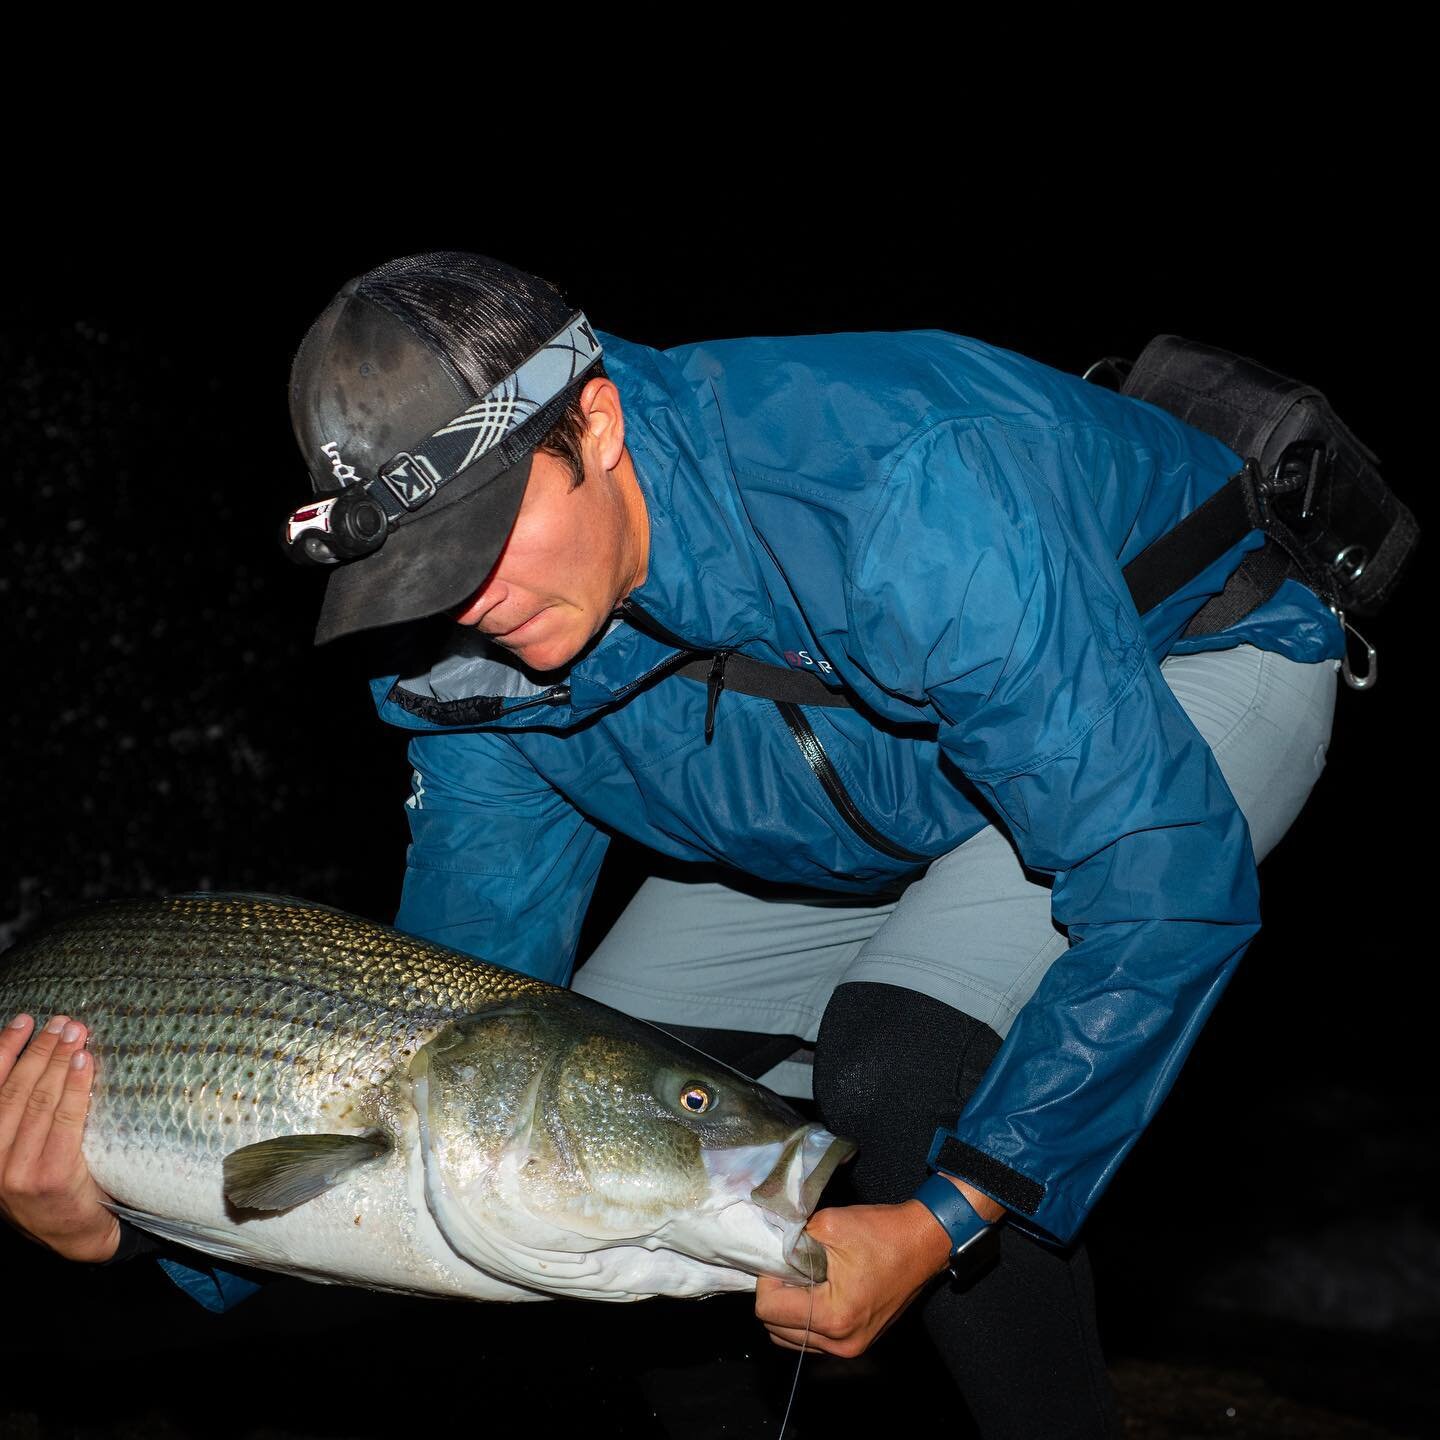 Hard to get a grip on a big angry bass. #stripedbasslures #stripedbassmigration #stripedbassplugs #onthewatermagazine #nightshiftcrew to #surfcasting #surfcaster #surfcasters #striper  #stripedbass #stripedbassfishing 
#stripedbass #stripedbasslures 